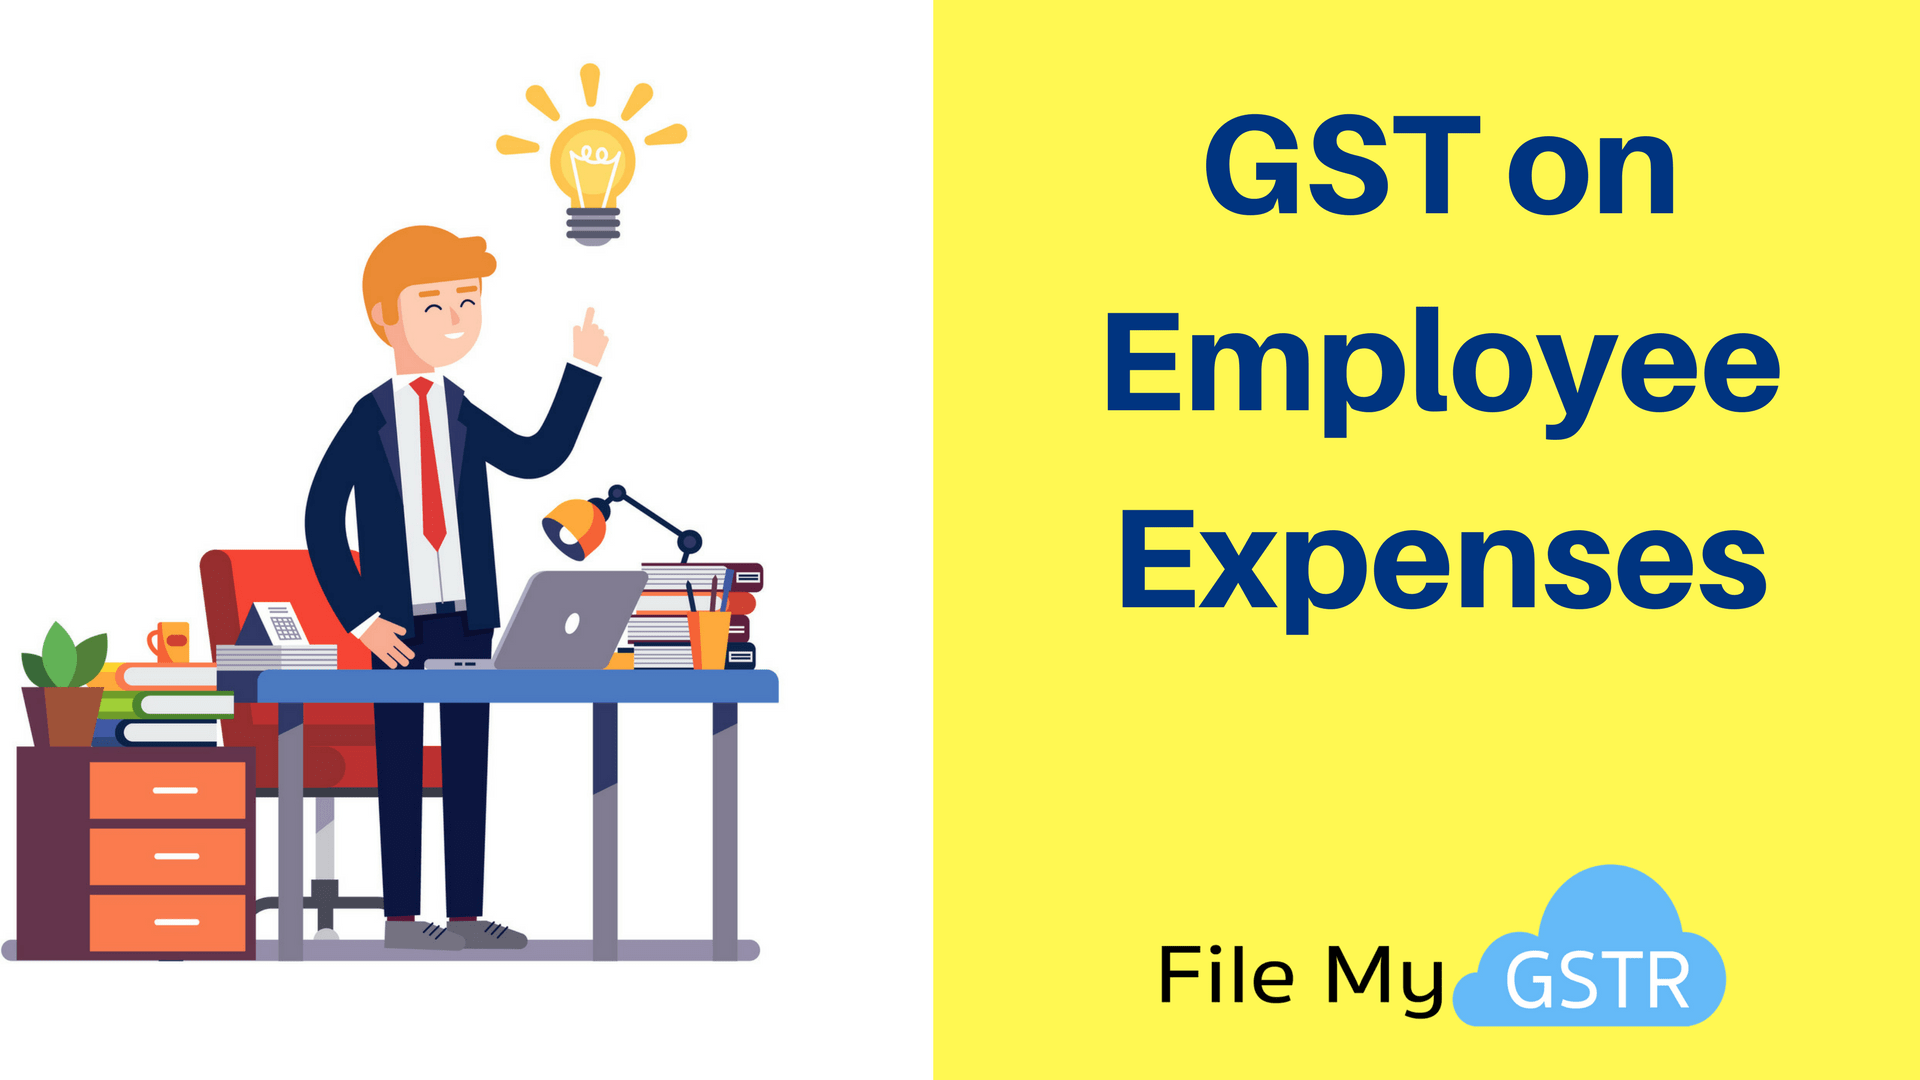 GST on Employee Expenses